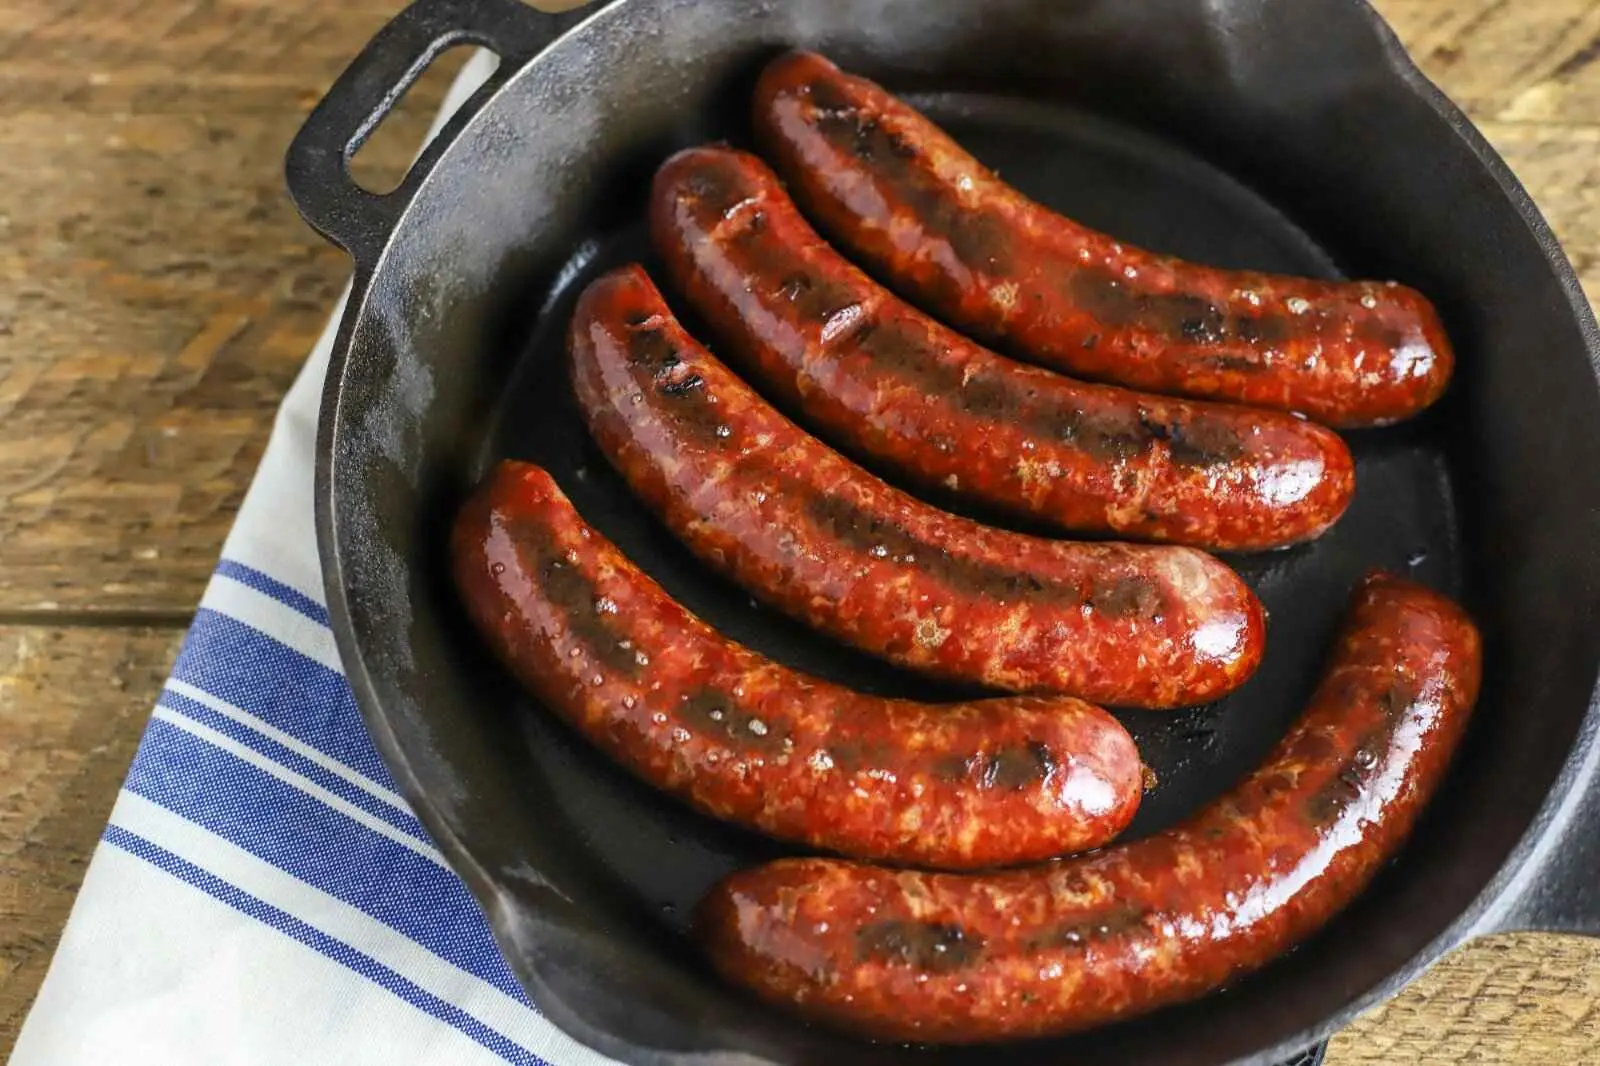 smoked sausages - What is a smoked sausage